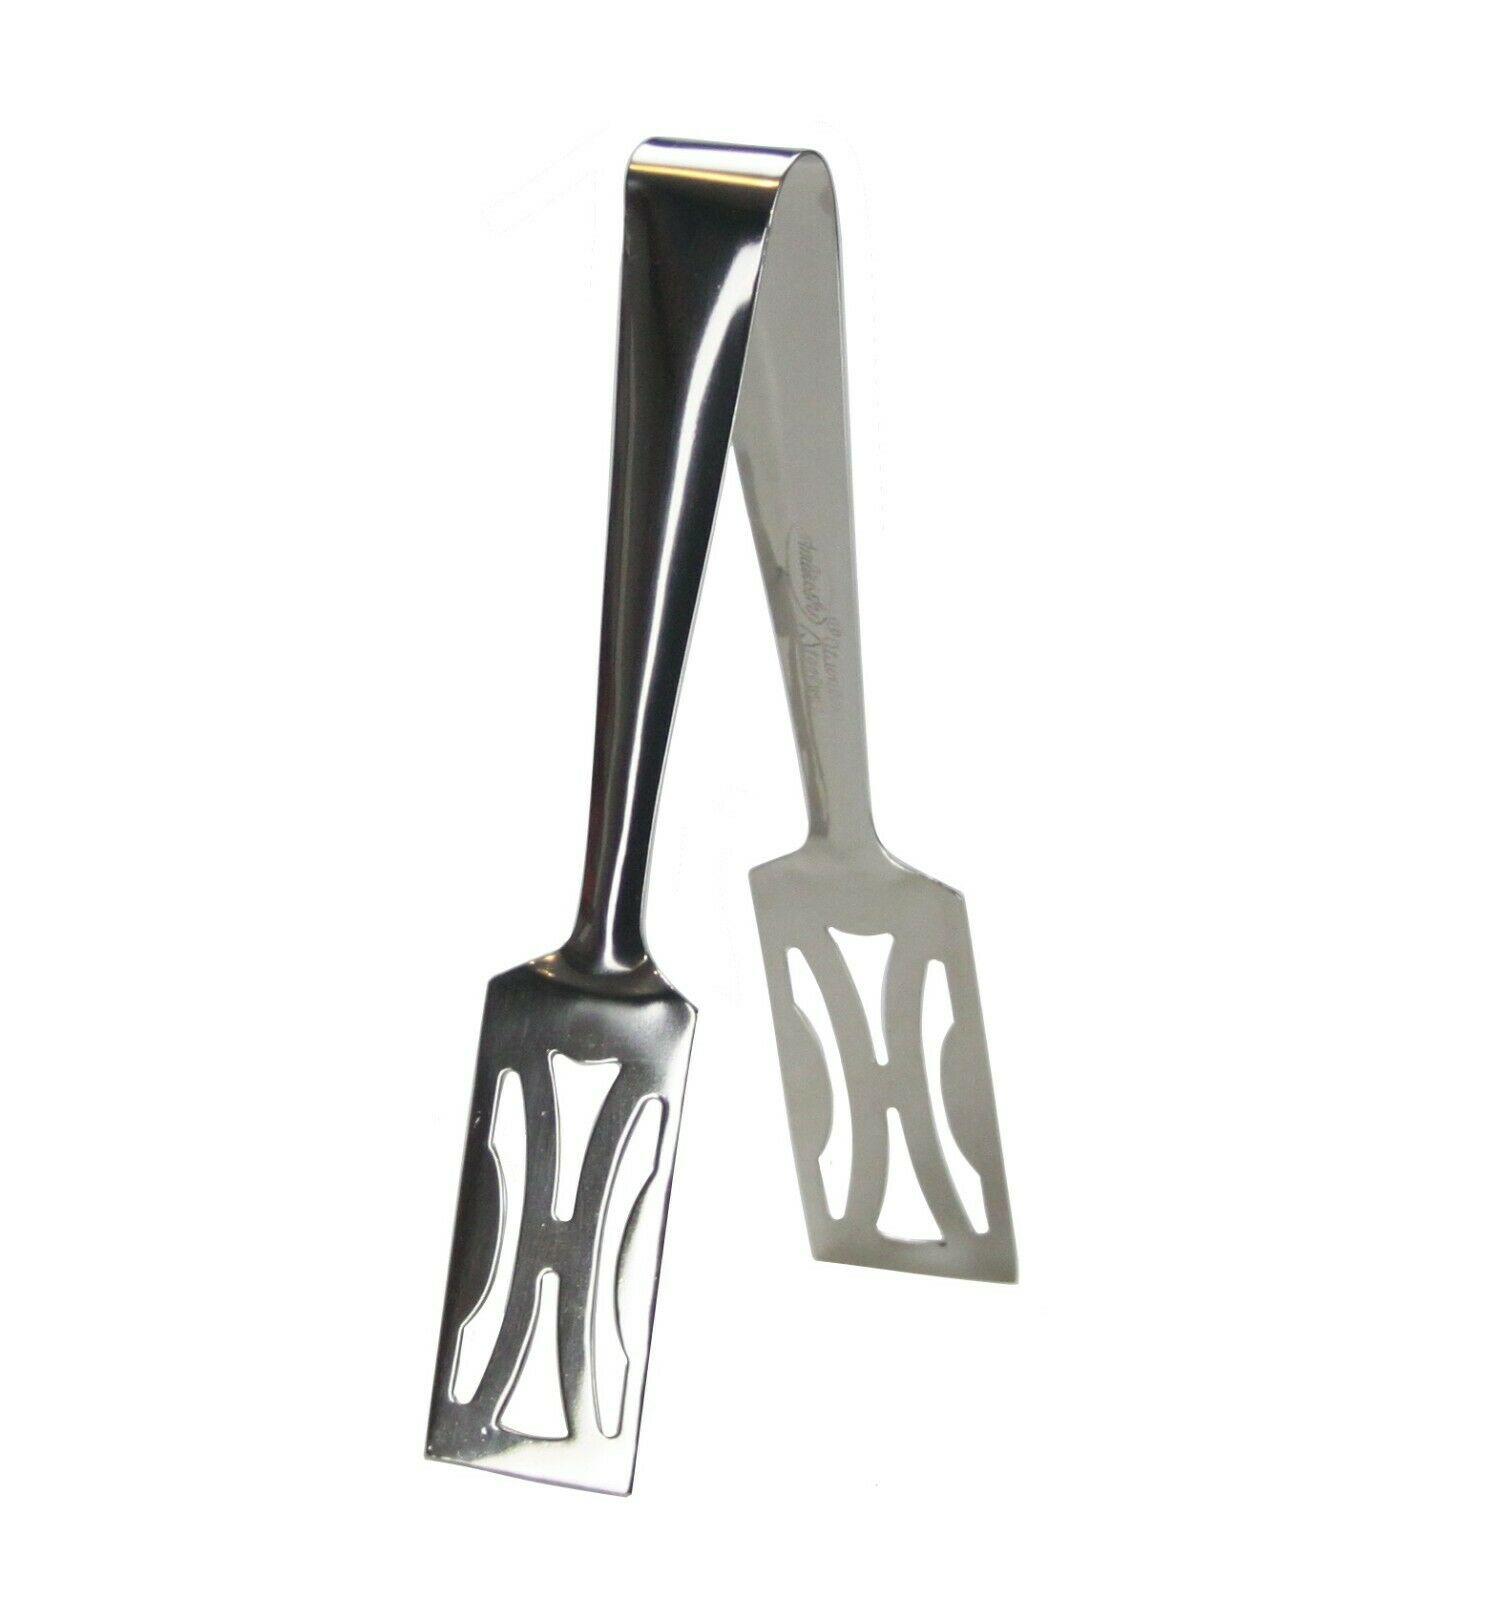 Cooking Tongs, Cooking And Grill Tongs, Kitchen Tongs, Grill Tongs Made Of  Stainless Steel And Silicone, Sausage Tongs, Roasting Tongs, Asparagus Tong